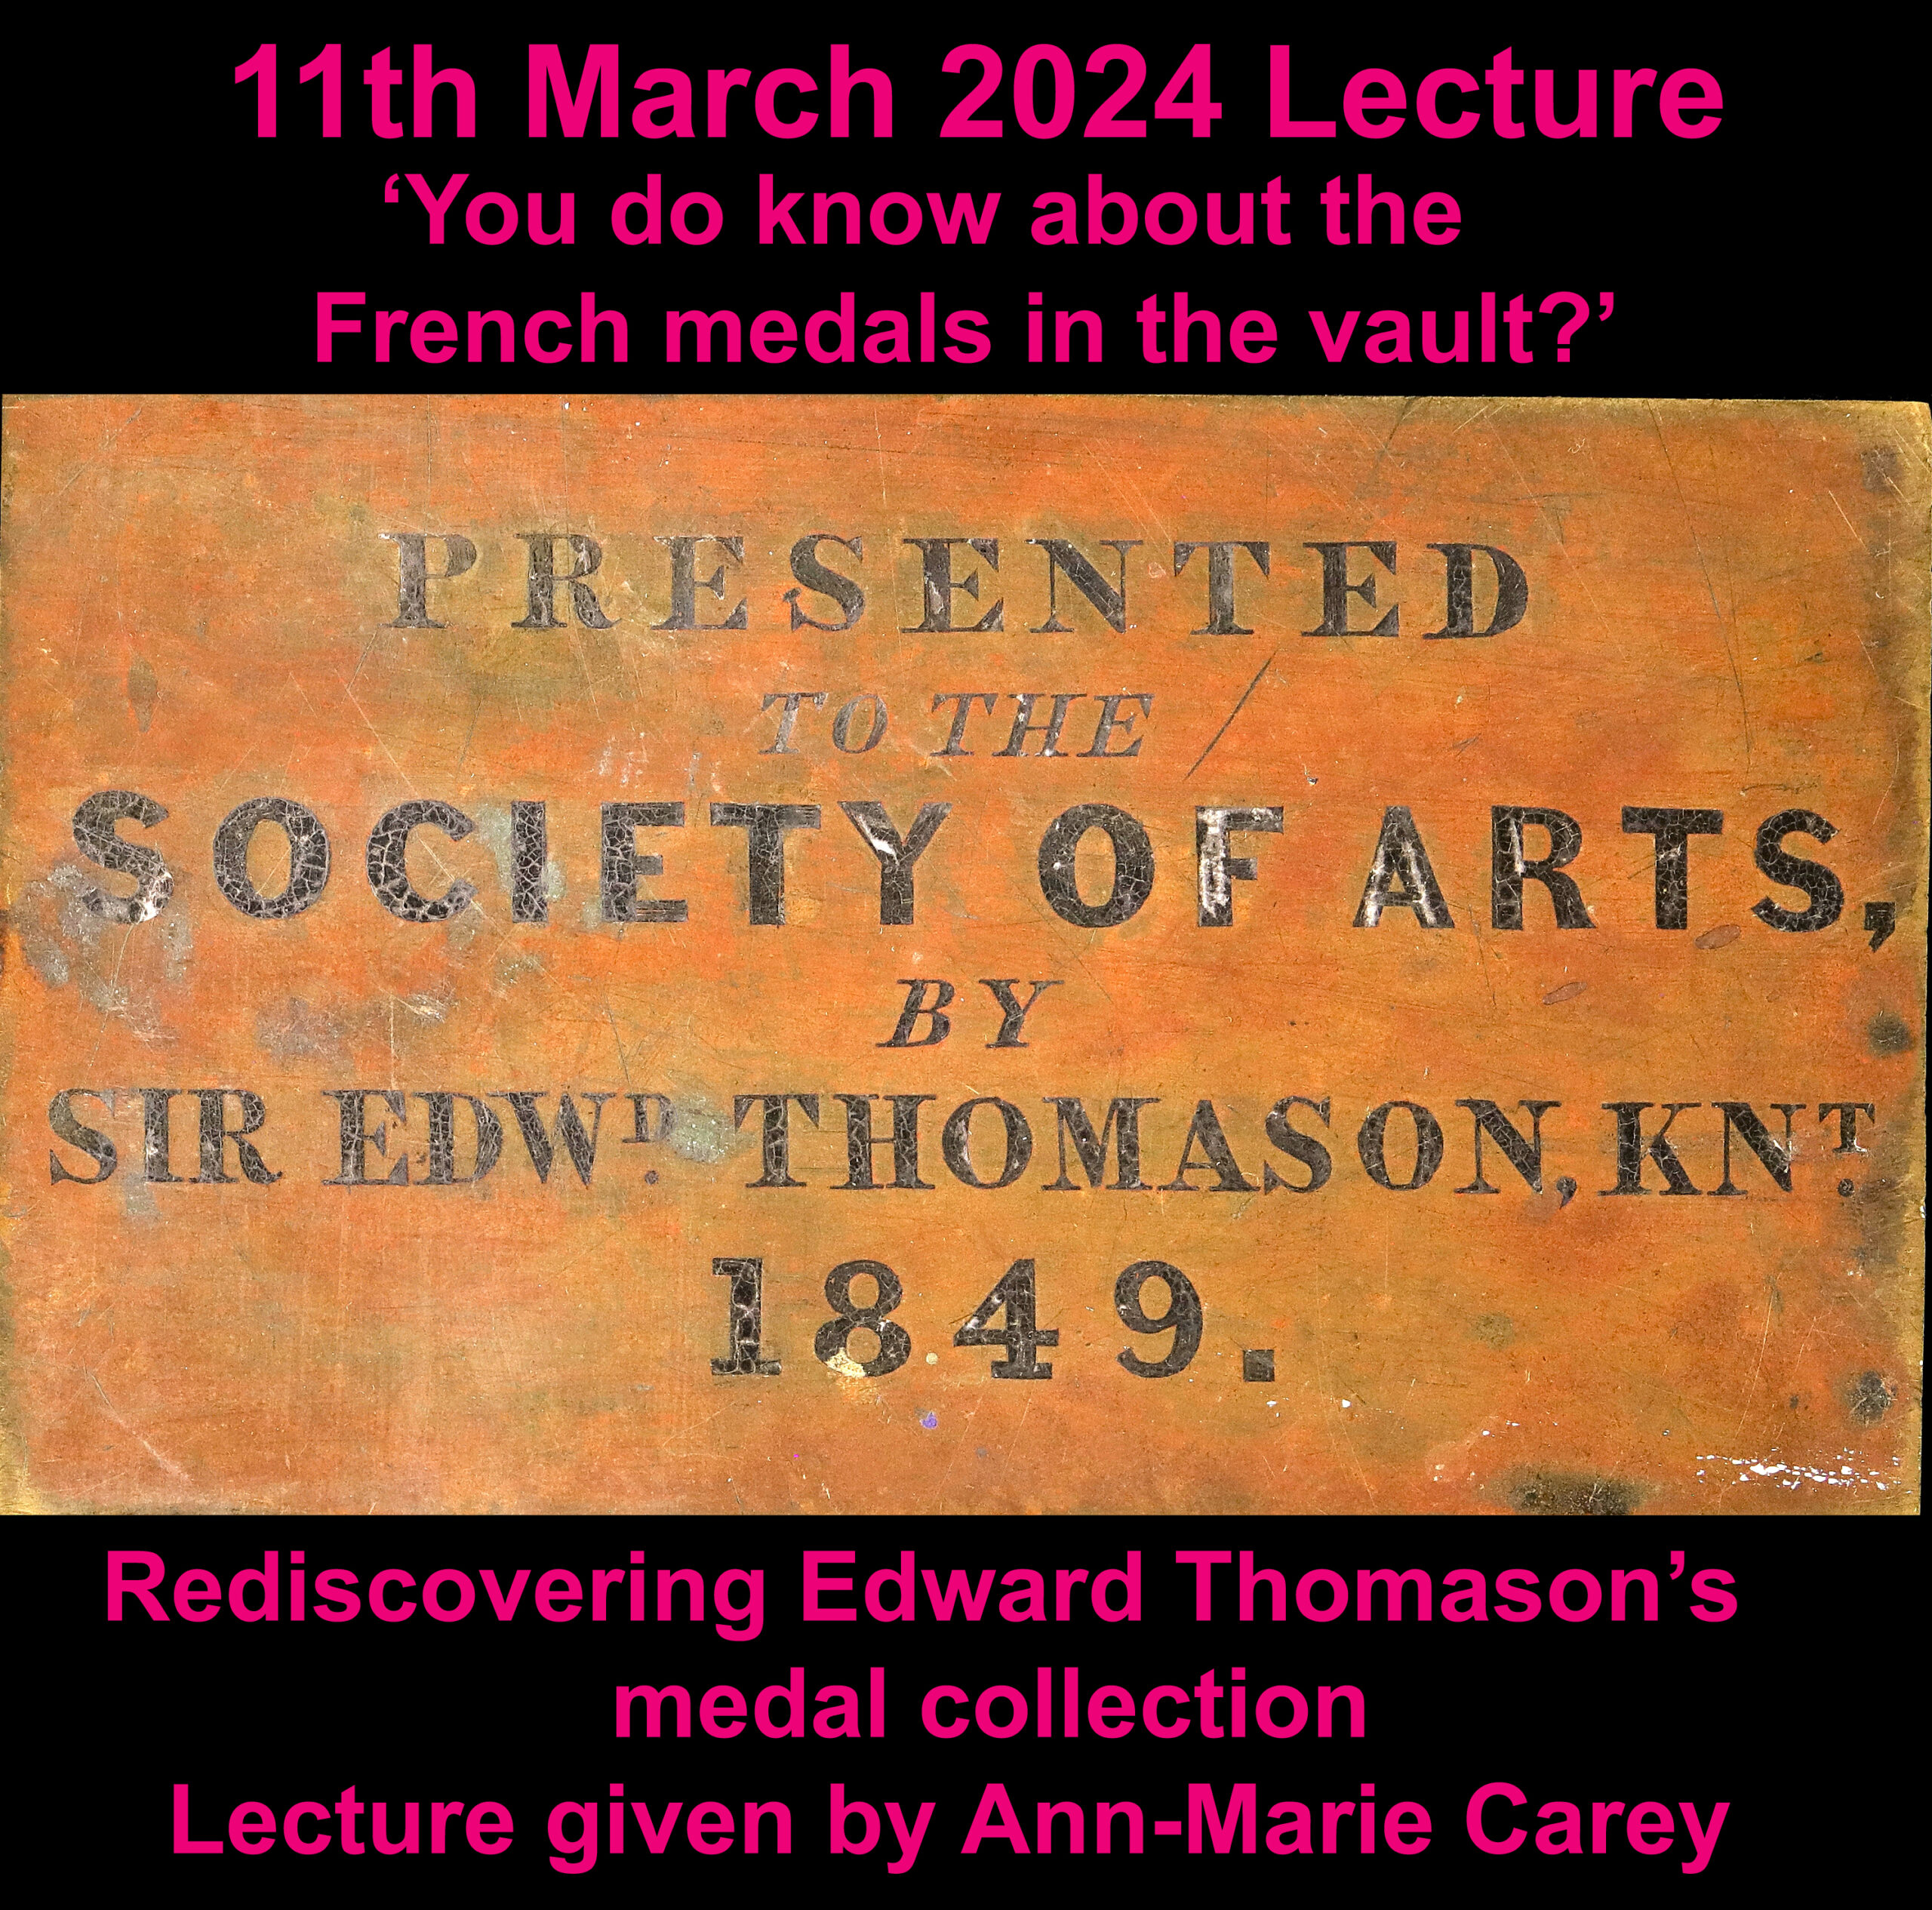 11th MARCH 2024 Lecture                        ‘You do know about the French medals in the vault?’: Rediscovering Edward Thomason’s medal collection.